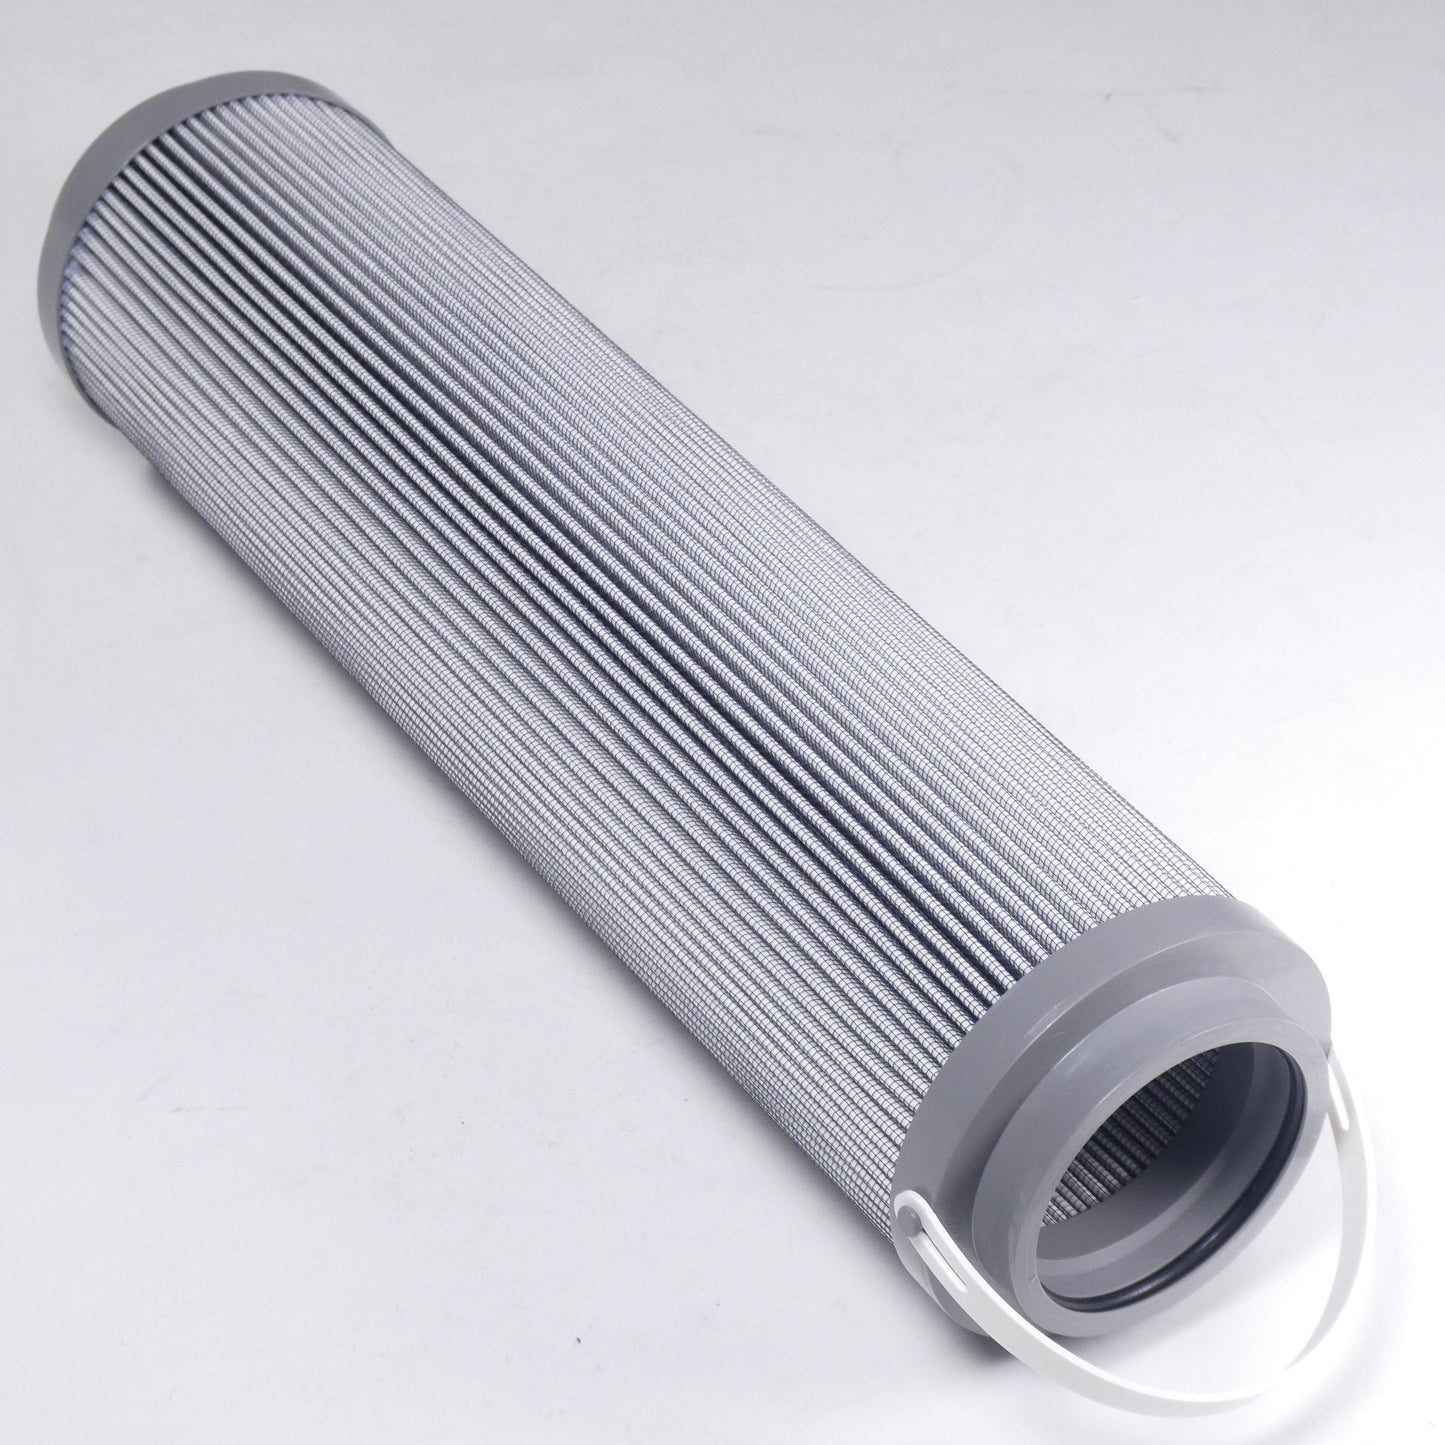 Hydrafil Replacement Filter Element for Husky 3020592